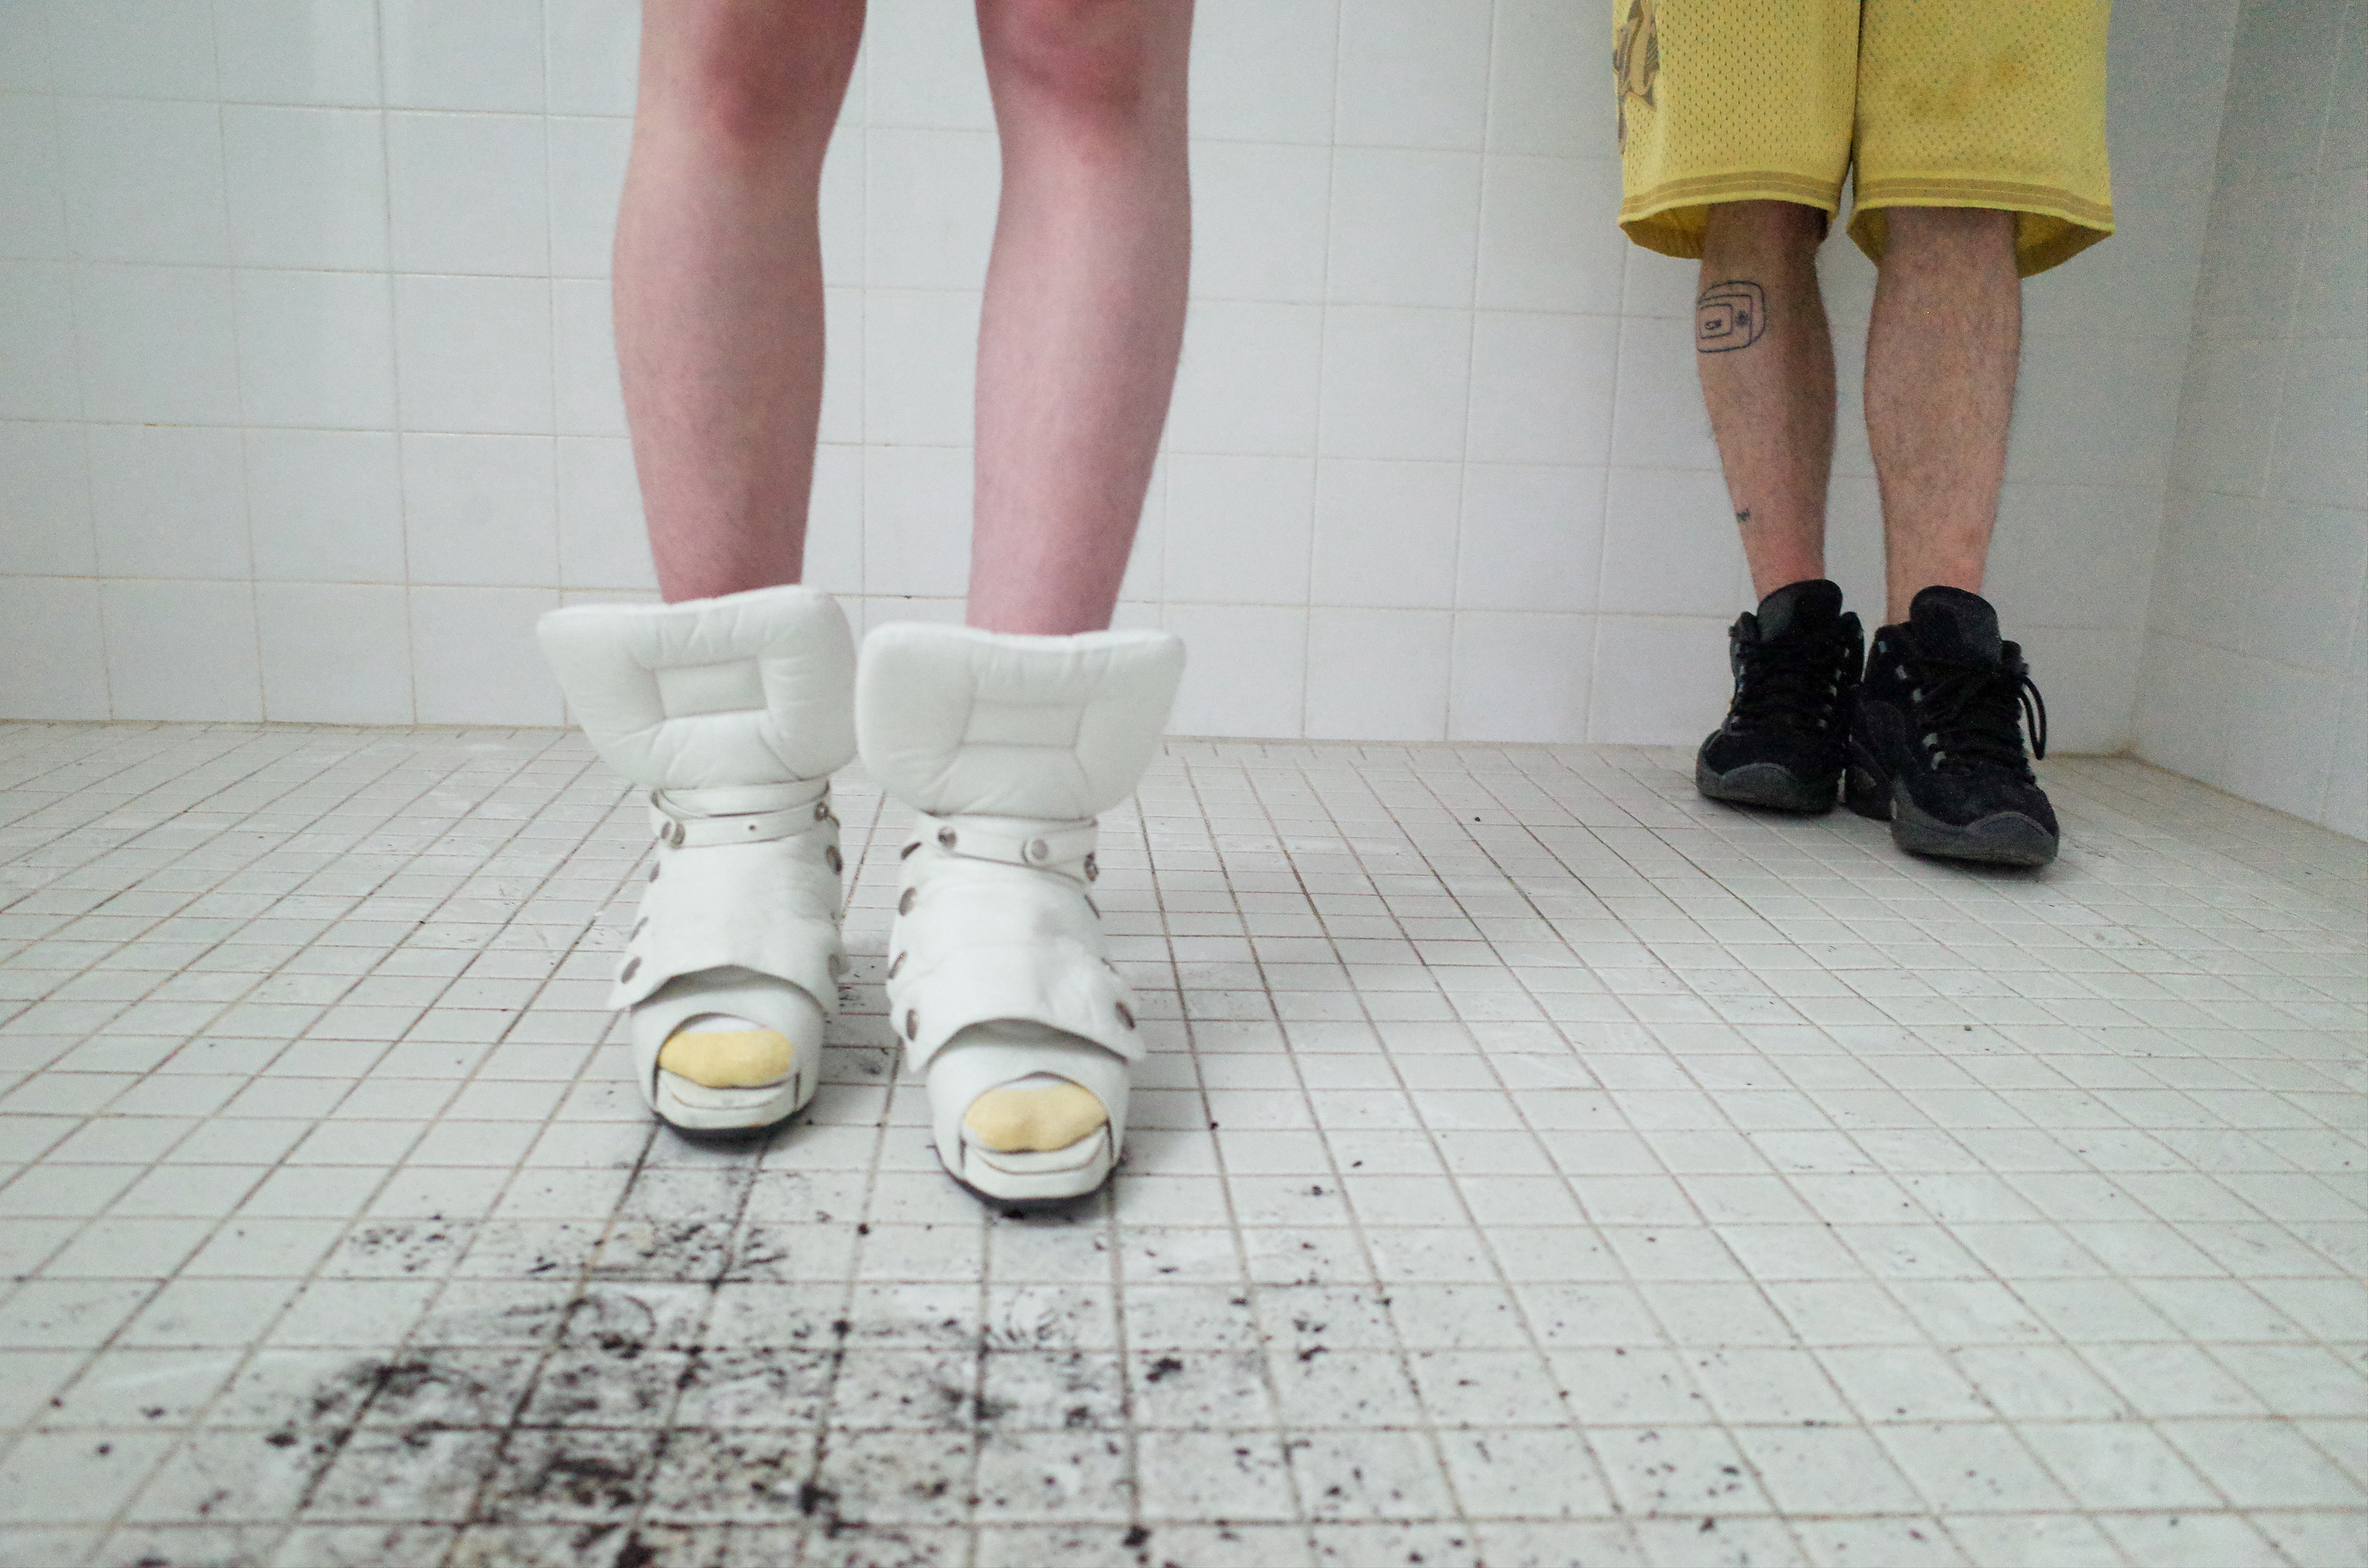 a close up of legs wearing oversized shoes in a white tiled shower room; there is mud on the floor